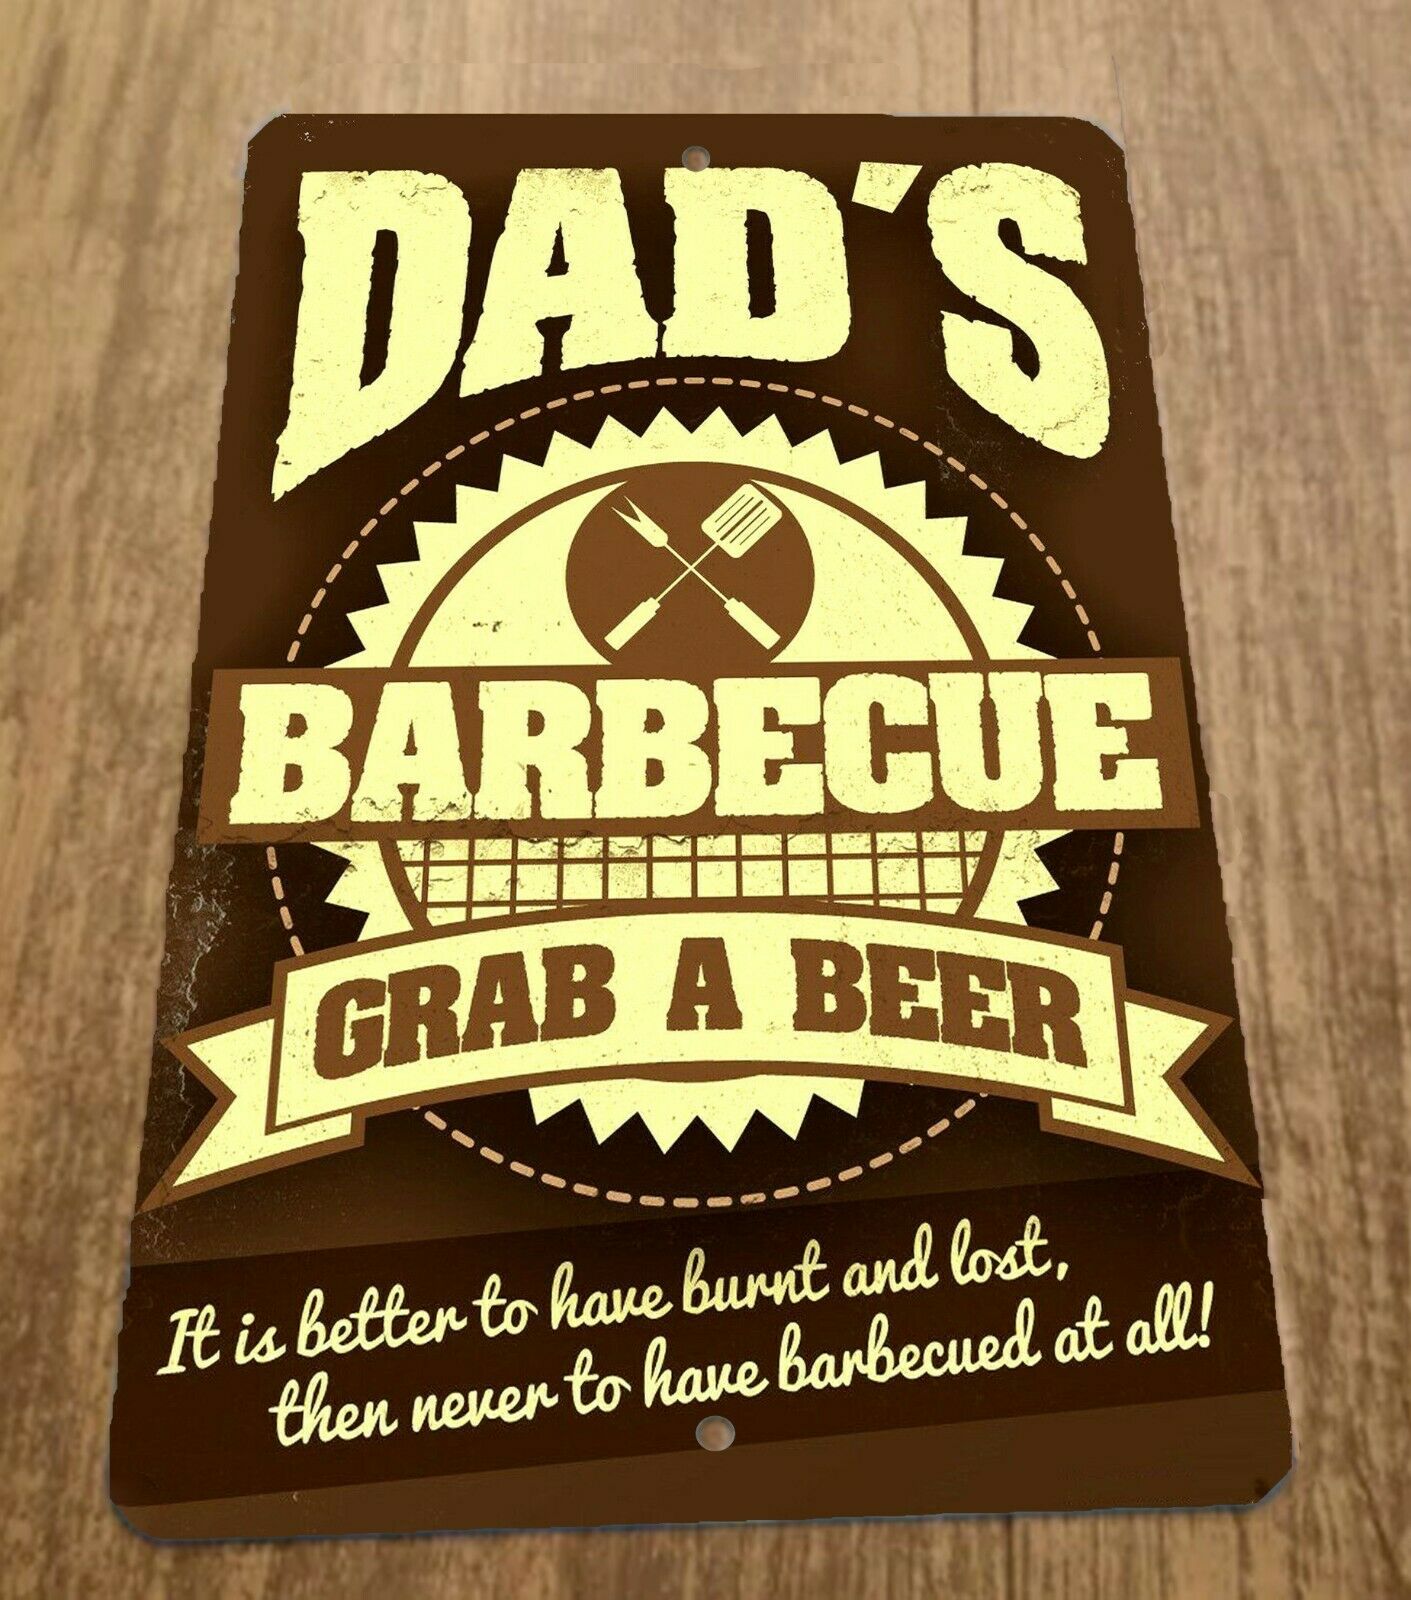 Dads BBQ Grab a Beer 8x12 Metal Wall Outdoor Patio Bar Sign